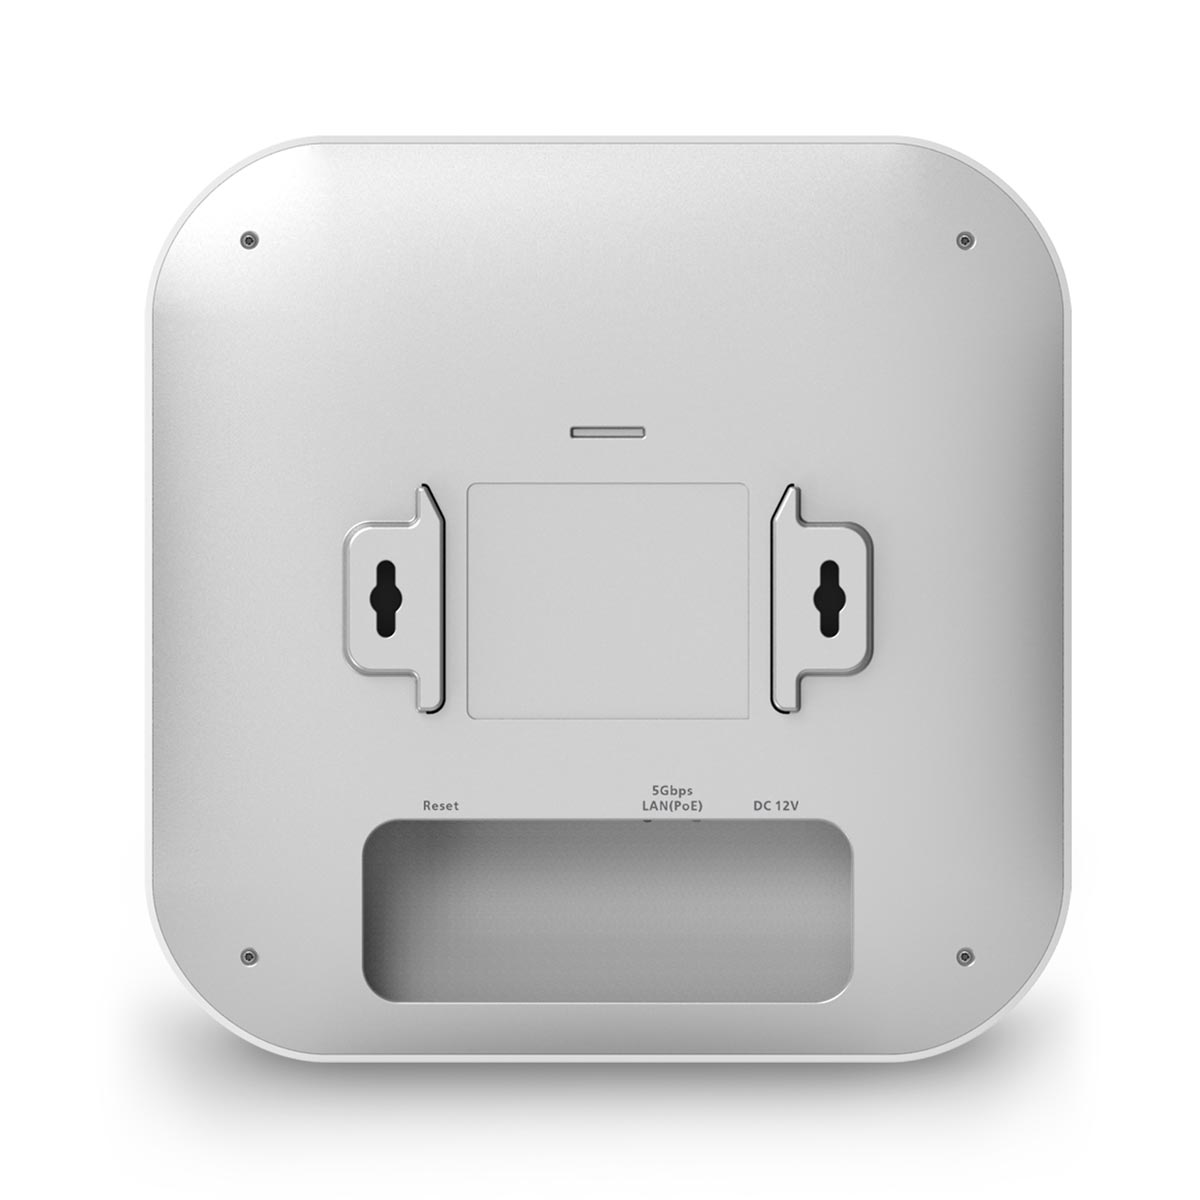 WiFi 7 Access Point: ECW536 4x4 Tri-Band Indoor